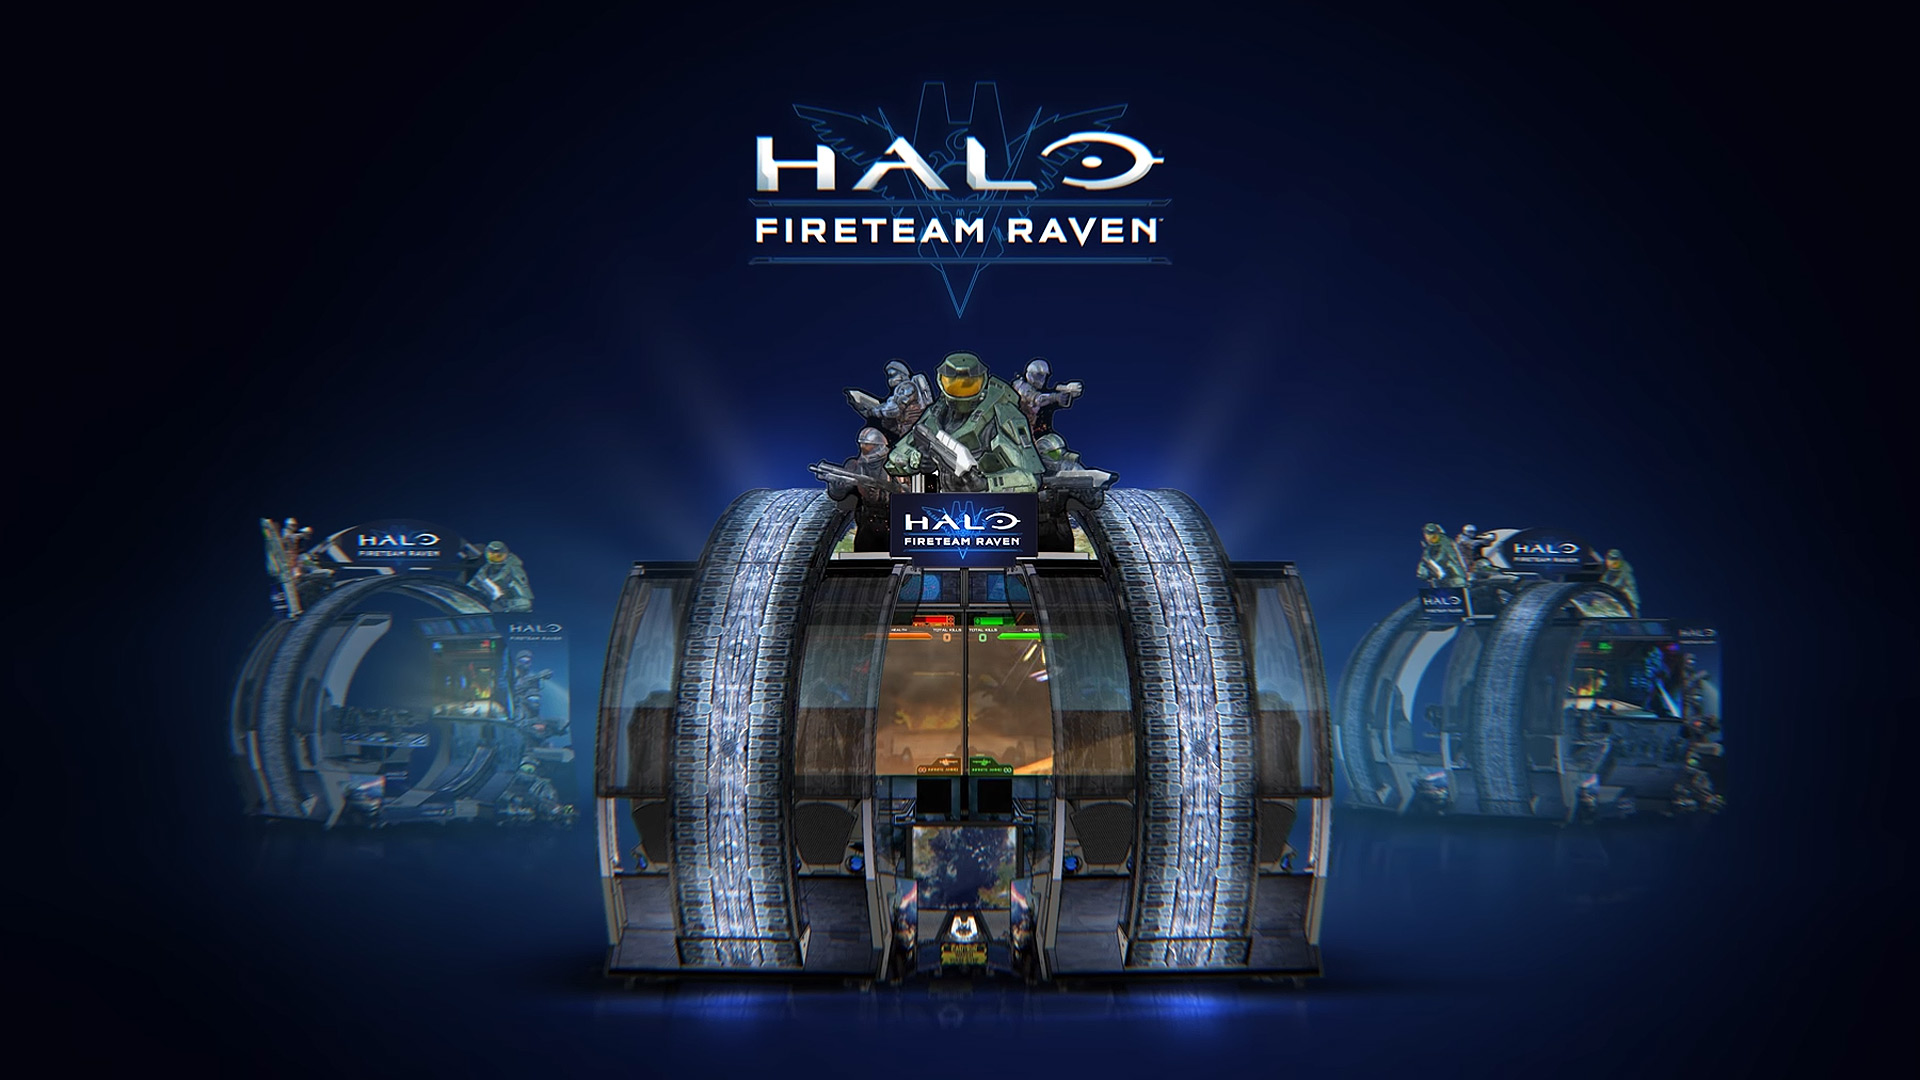 Halo games in order: A peak at Halo Fireteam Raven.